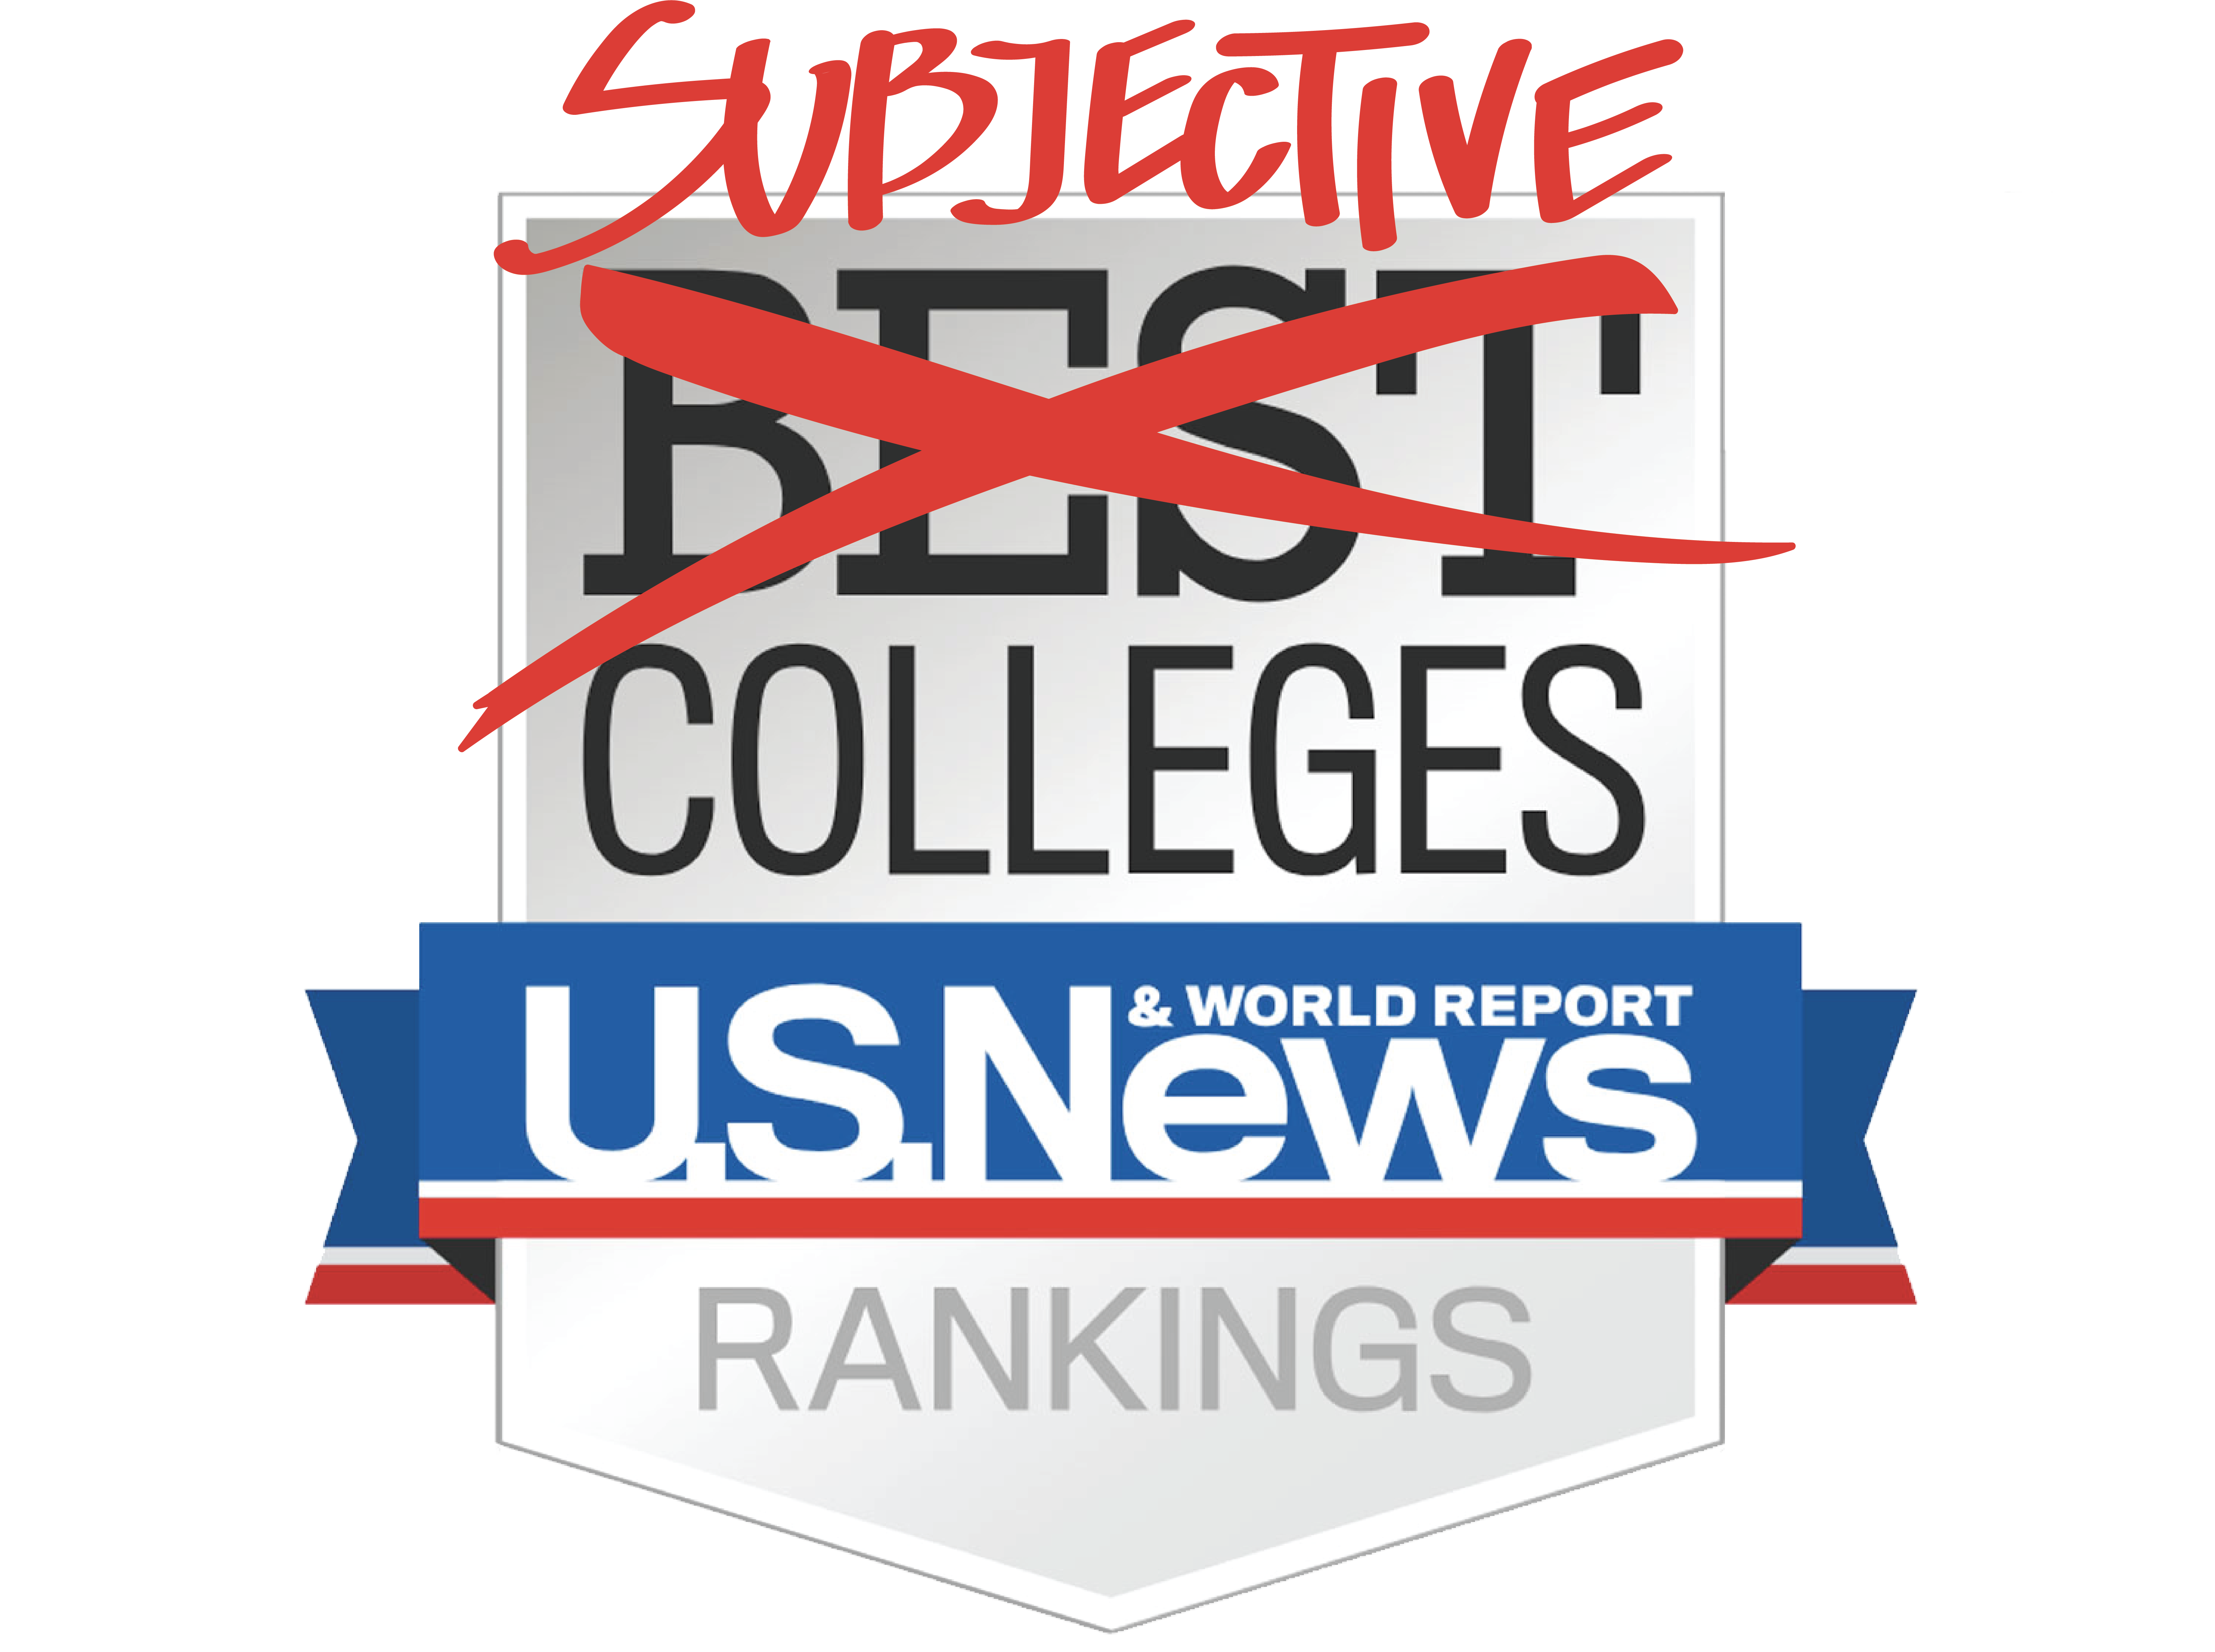 We should not fret about college rankings Daily Trojan